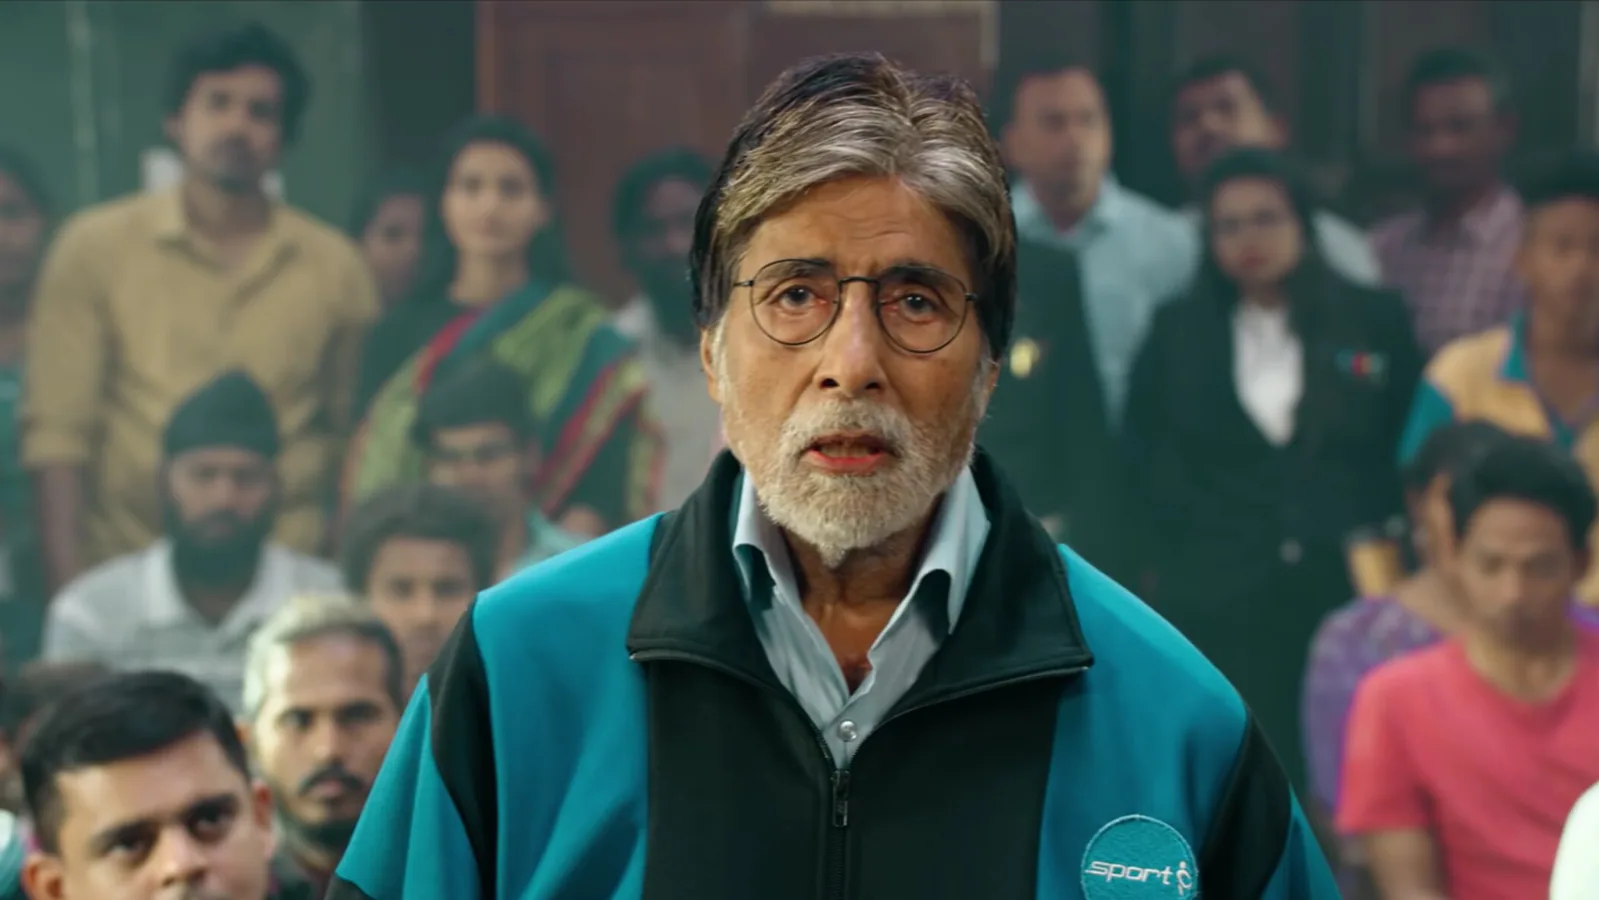 Jhund movie review: Amitabh Bachchan is spectacular in Nagraj Manjule’s film from the heart